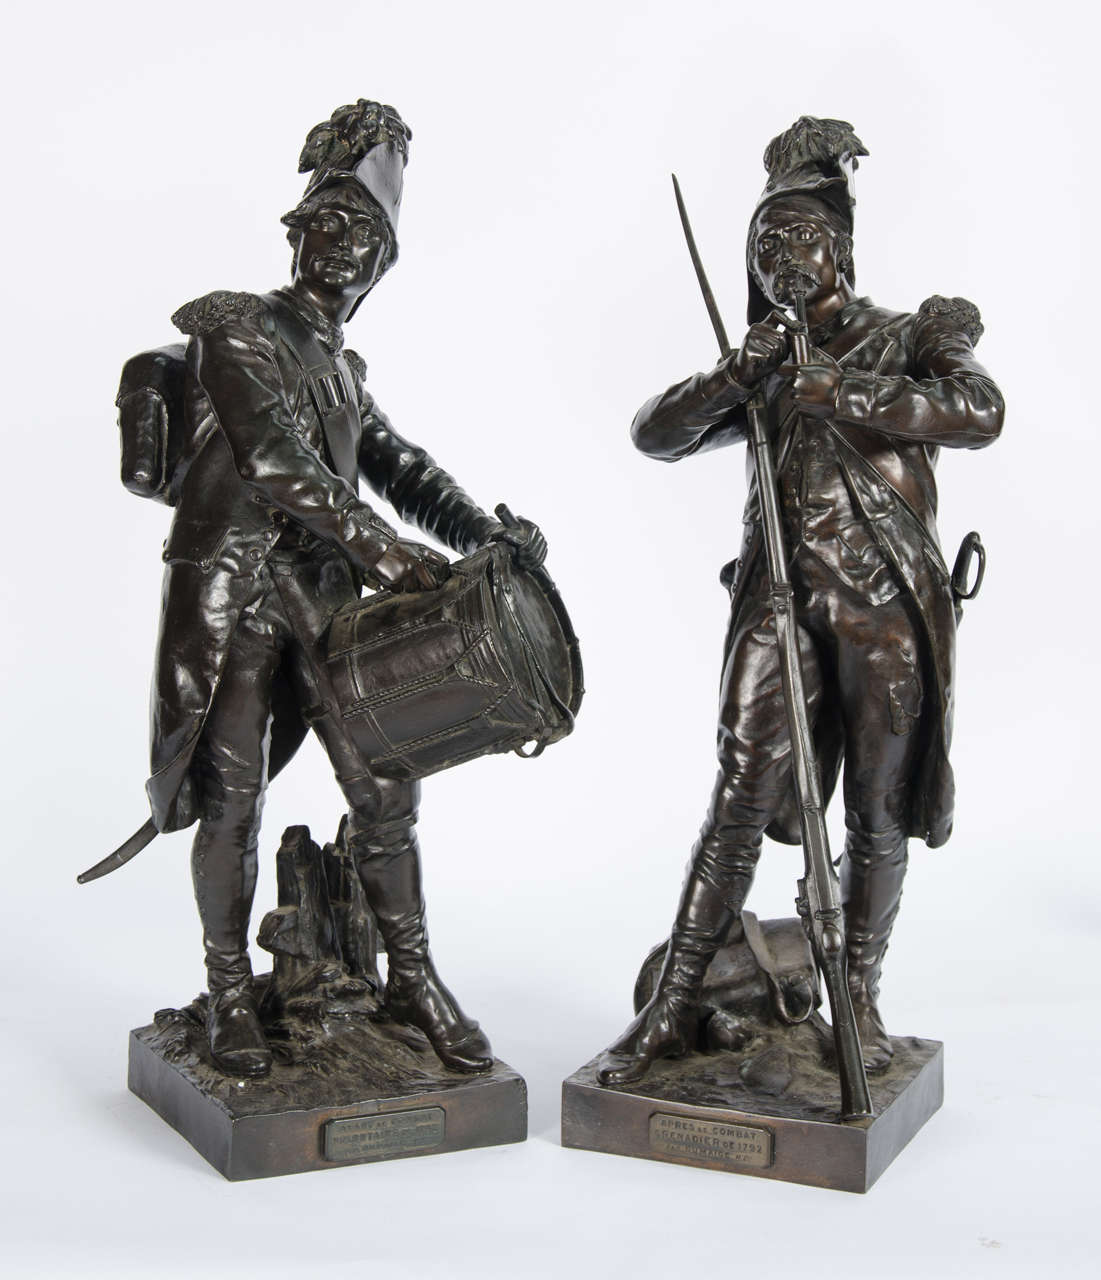 A very good quality pair of 19th century French bronze statues of a rifleman and drummer, signed E H Dumaige.